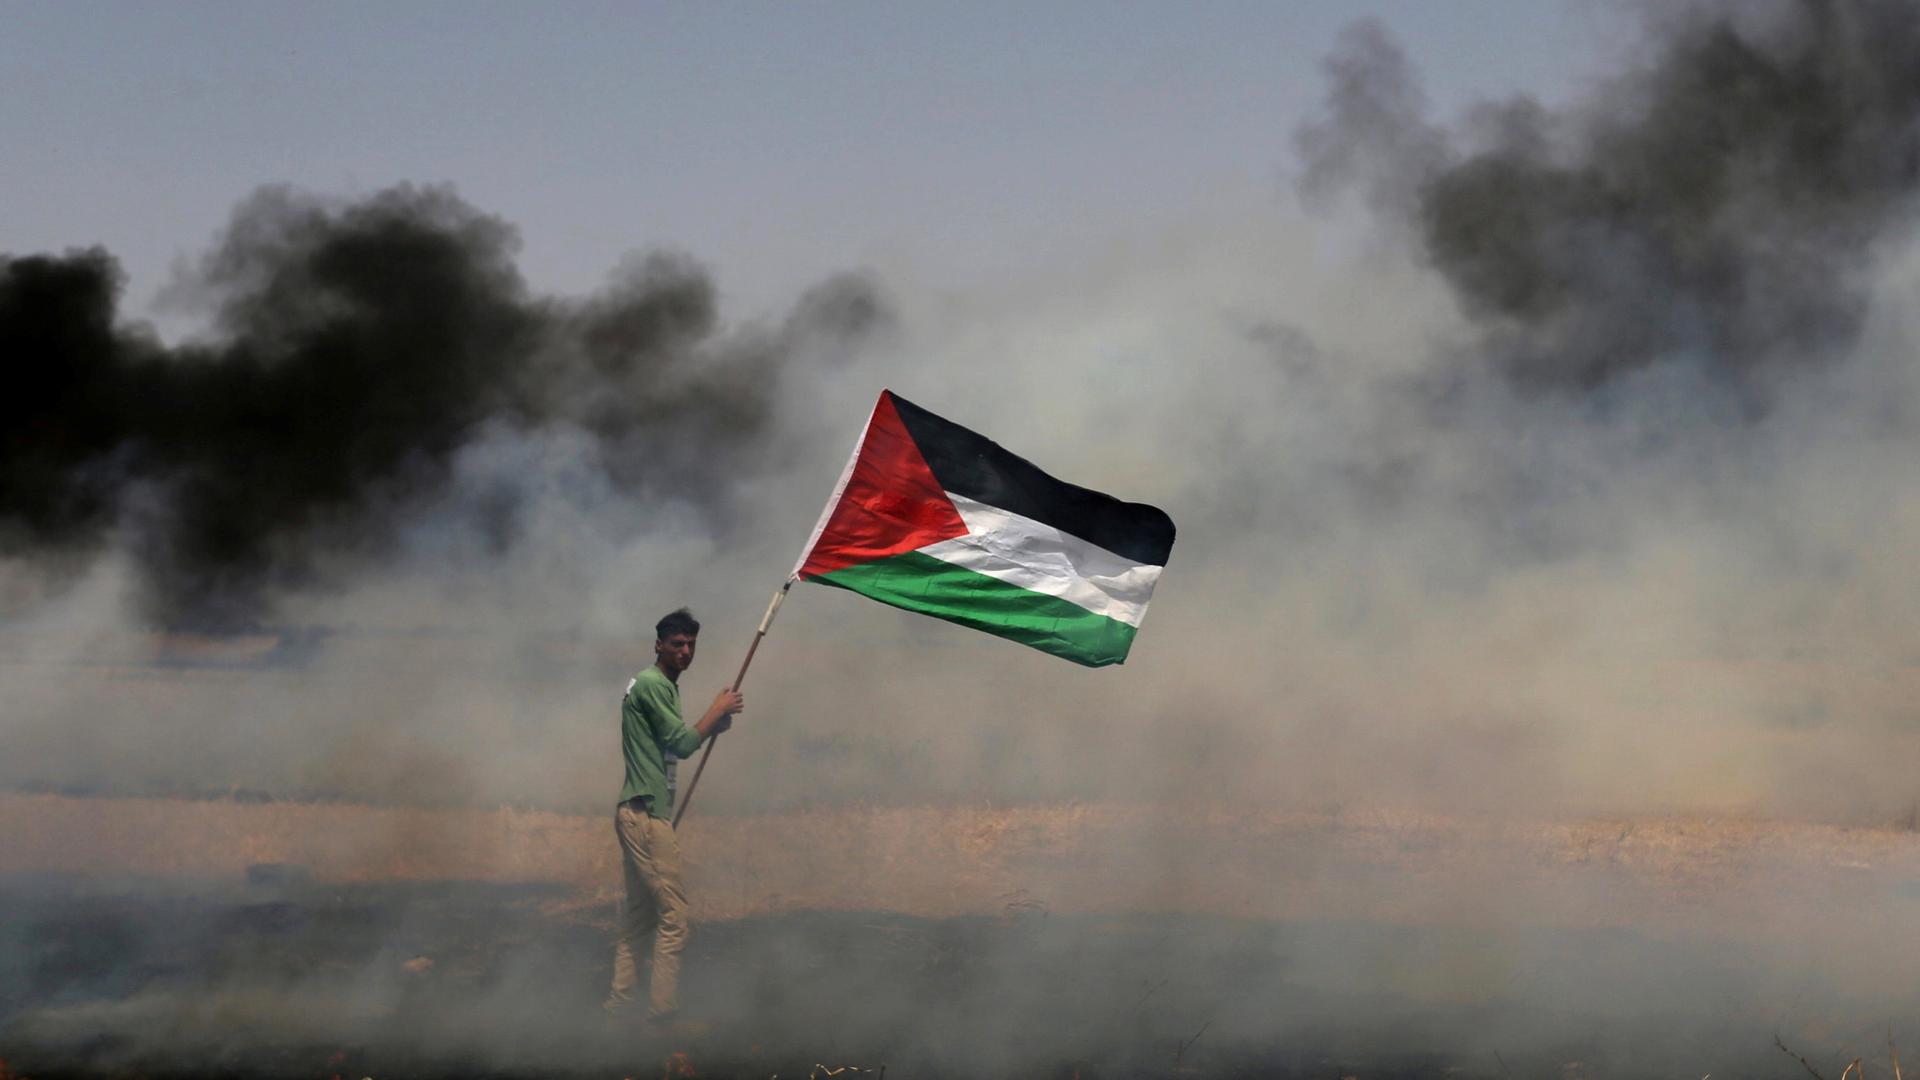 A demonstrator holds a Palestinian flag during clashes with Israeli troops at a protest where Palestinians demand the right to return to their homeland, near the Israel-Gaza border in the southern Gaza Strip on April 13, 2018.